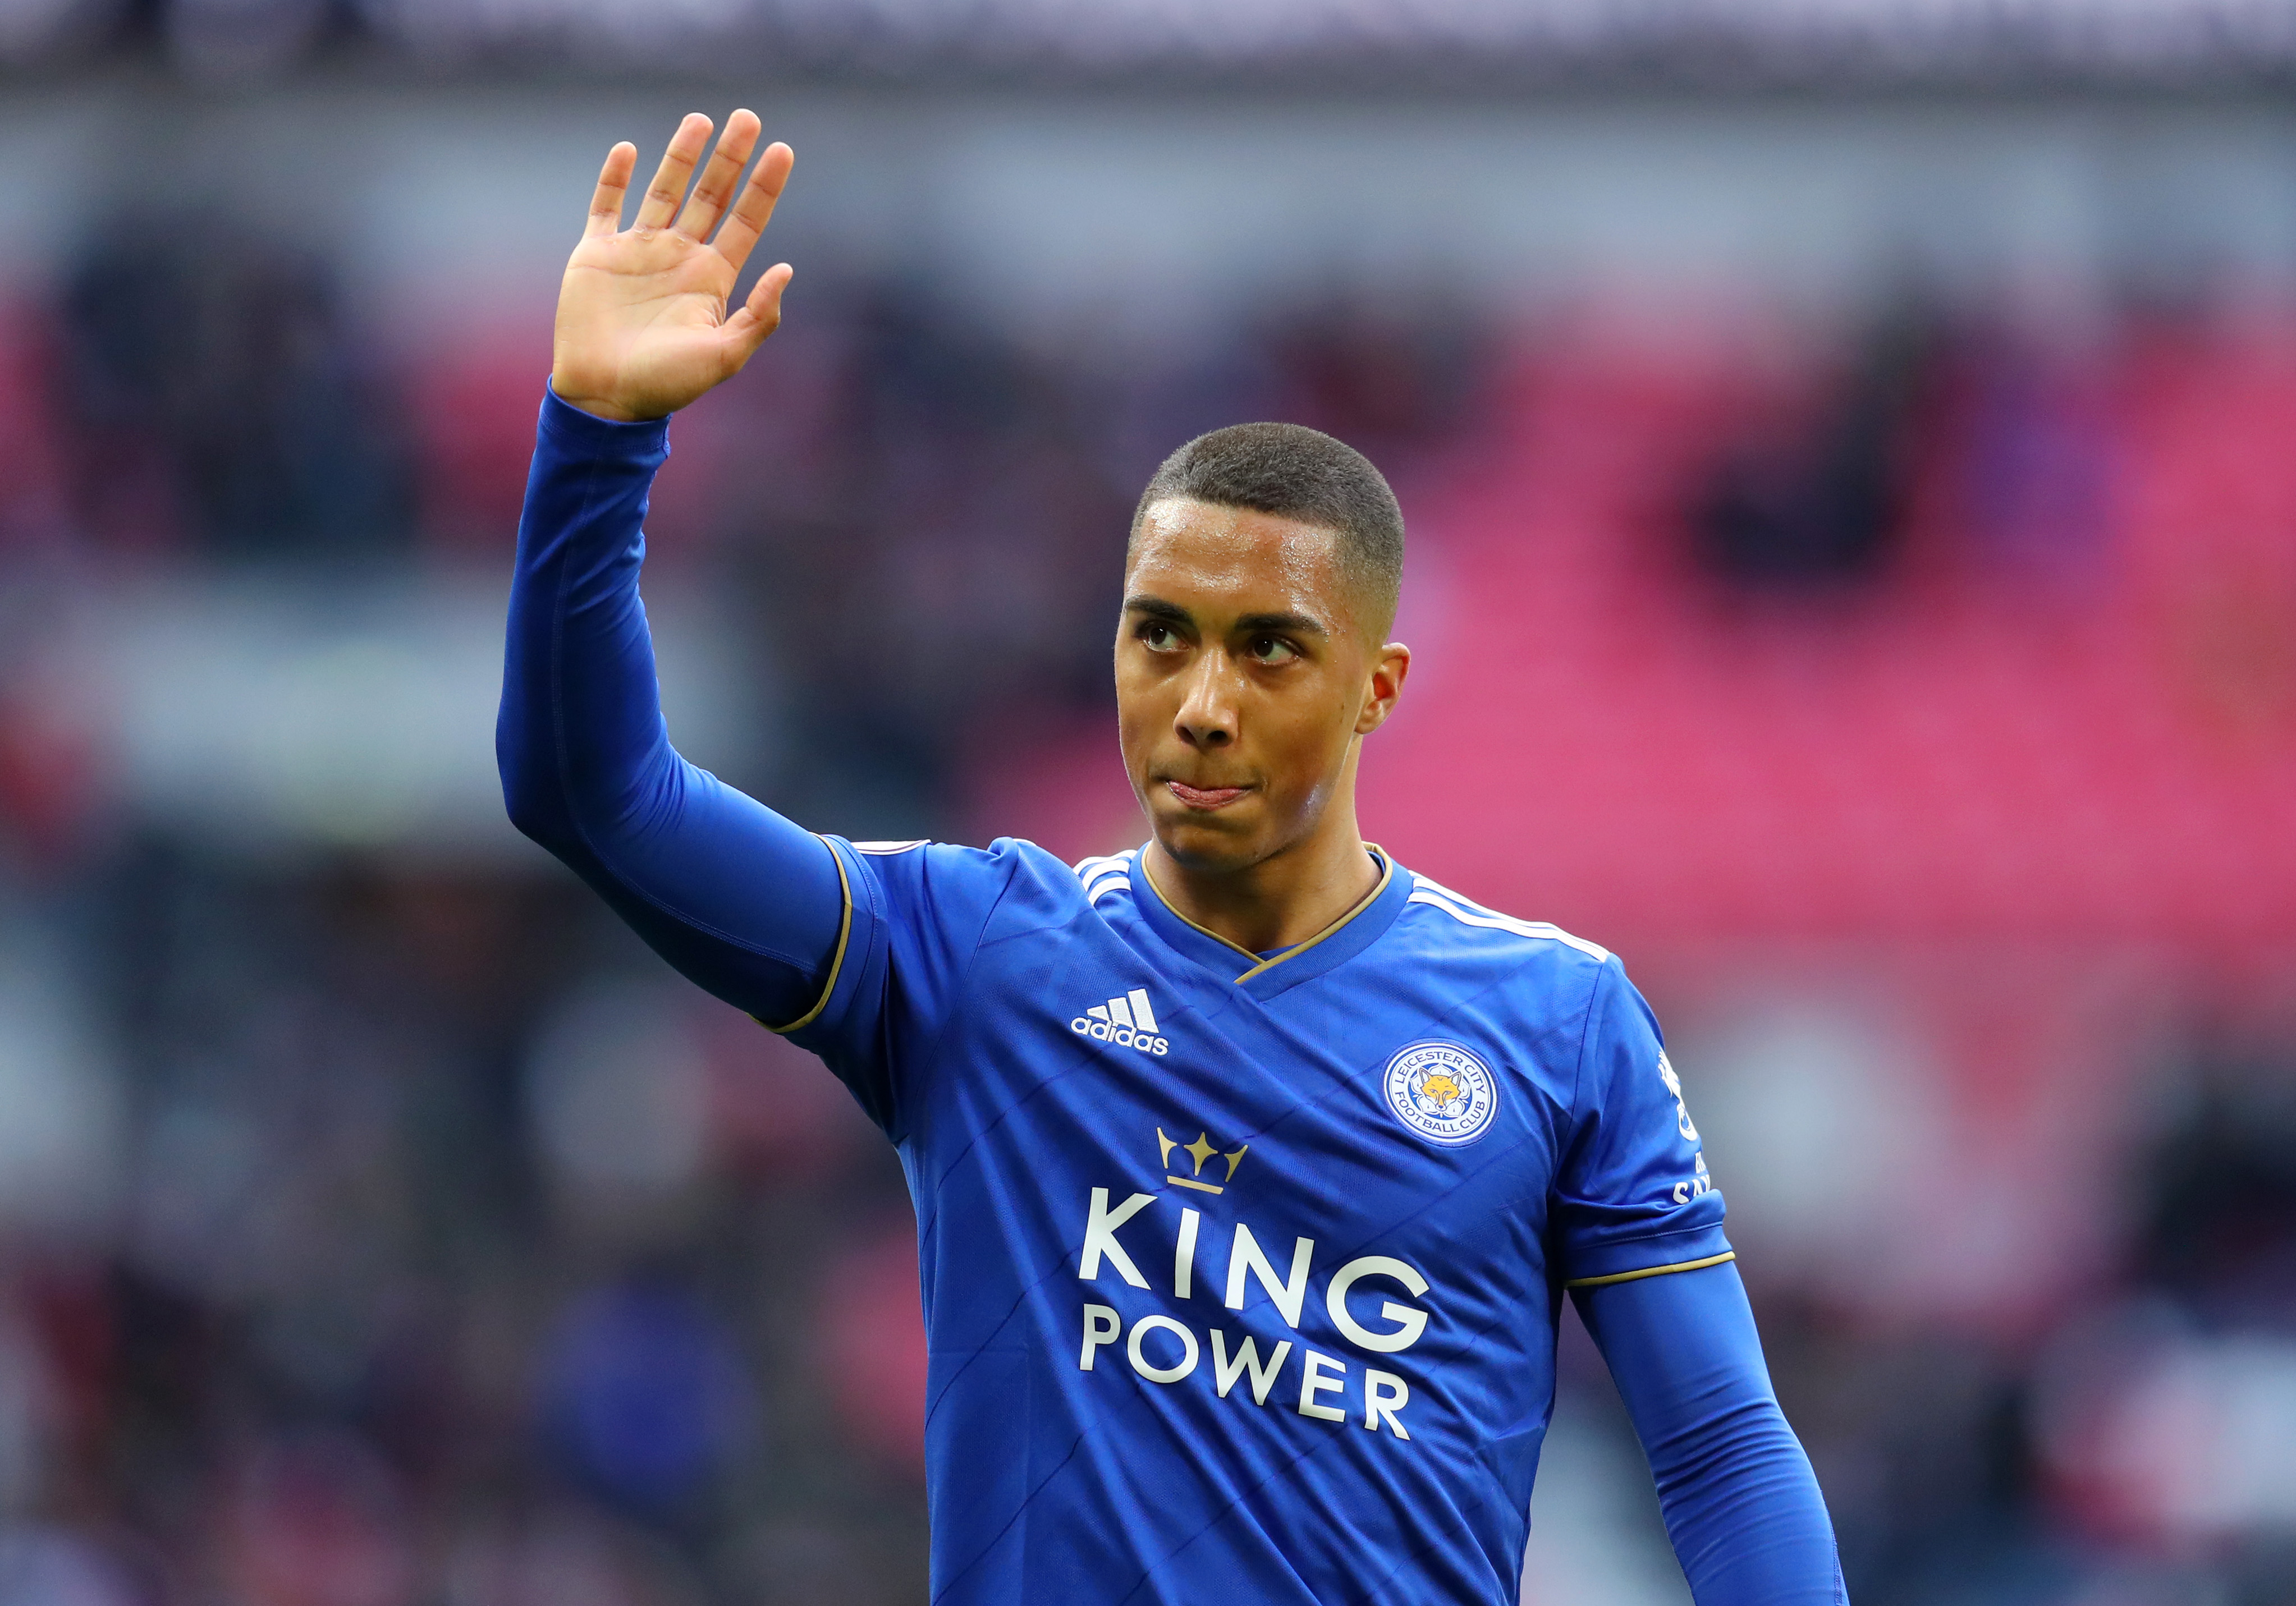 Will Tielemans bid goodbye to the King Power Stadium faithful? (Photo by Catherine Ivill/Getty Images)